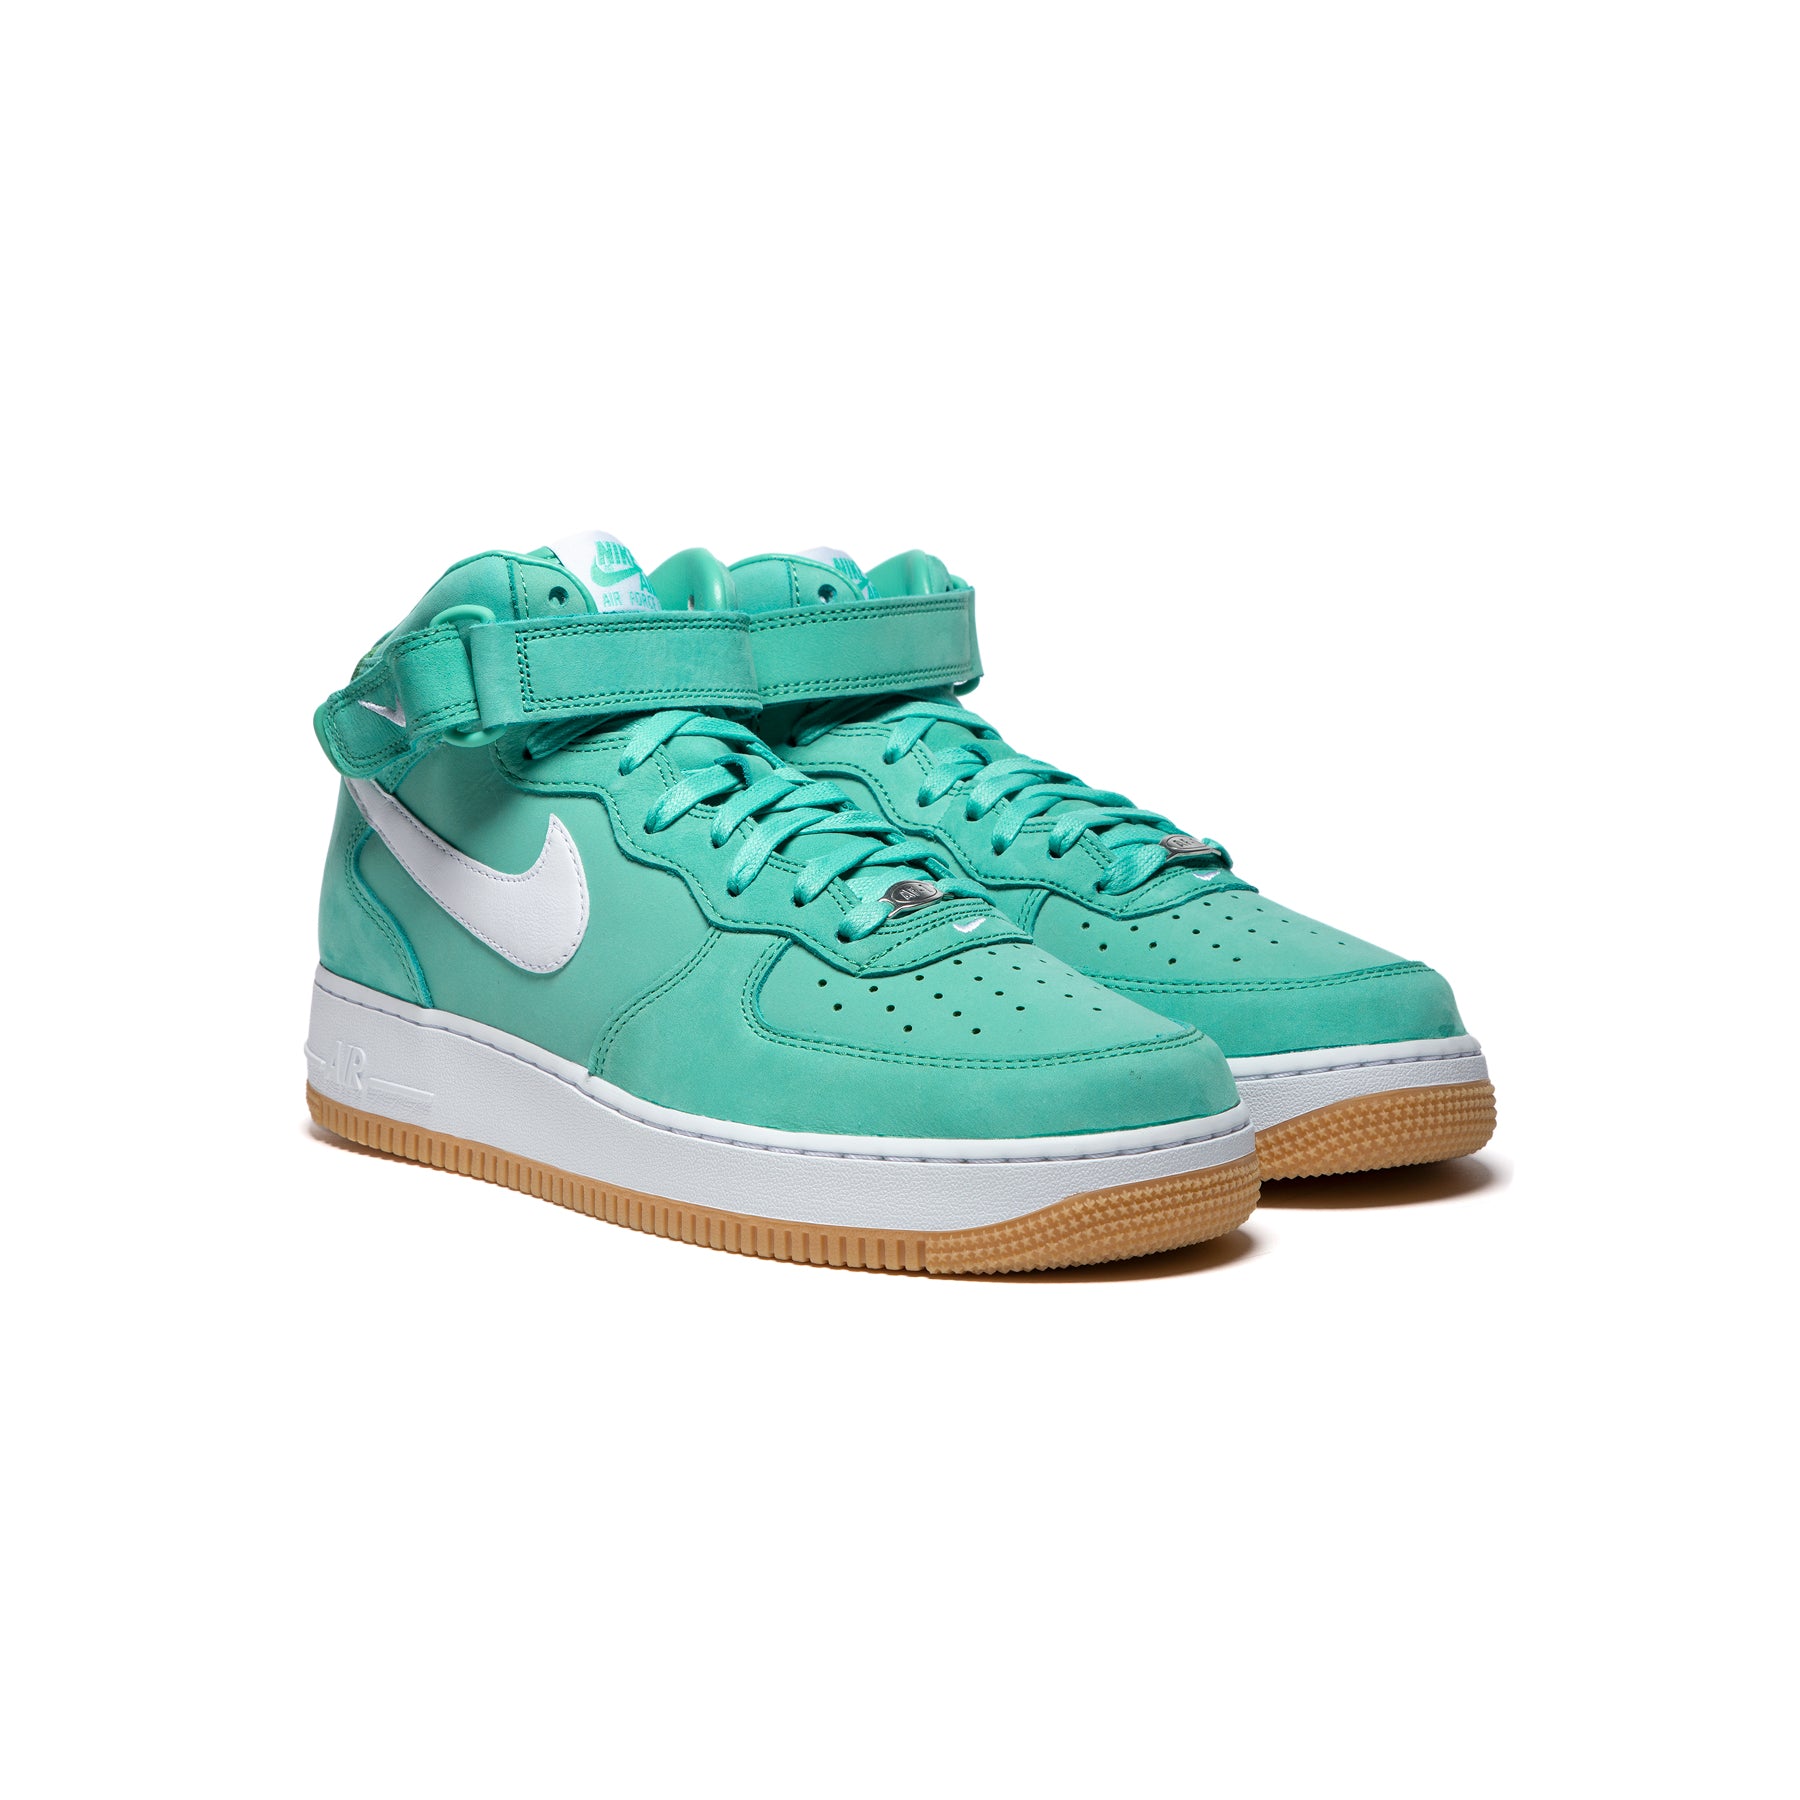 Nike Air Force 1 Cut-Out Swoosh White Washed Teal